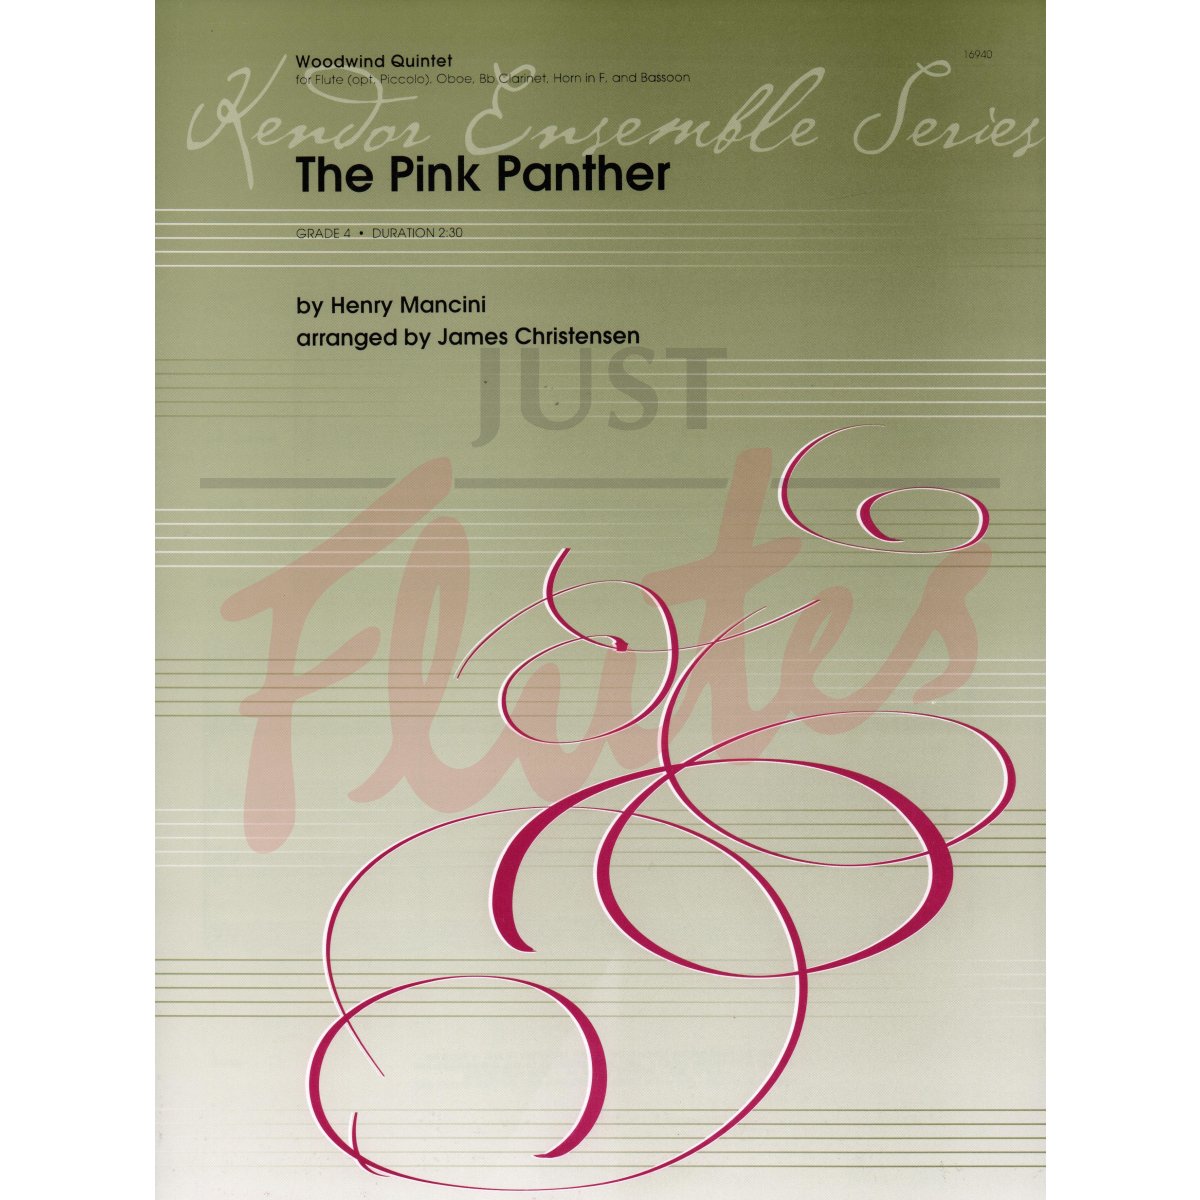 The Pink Panther [Wind Quintet]